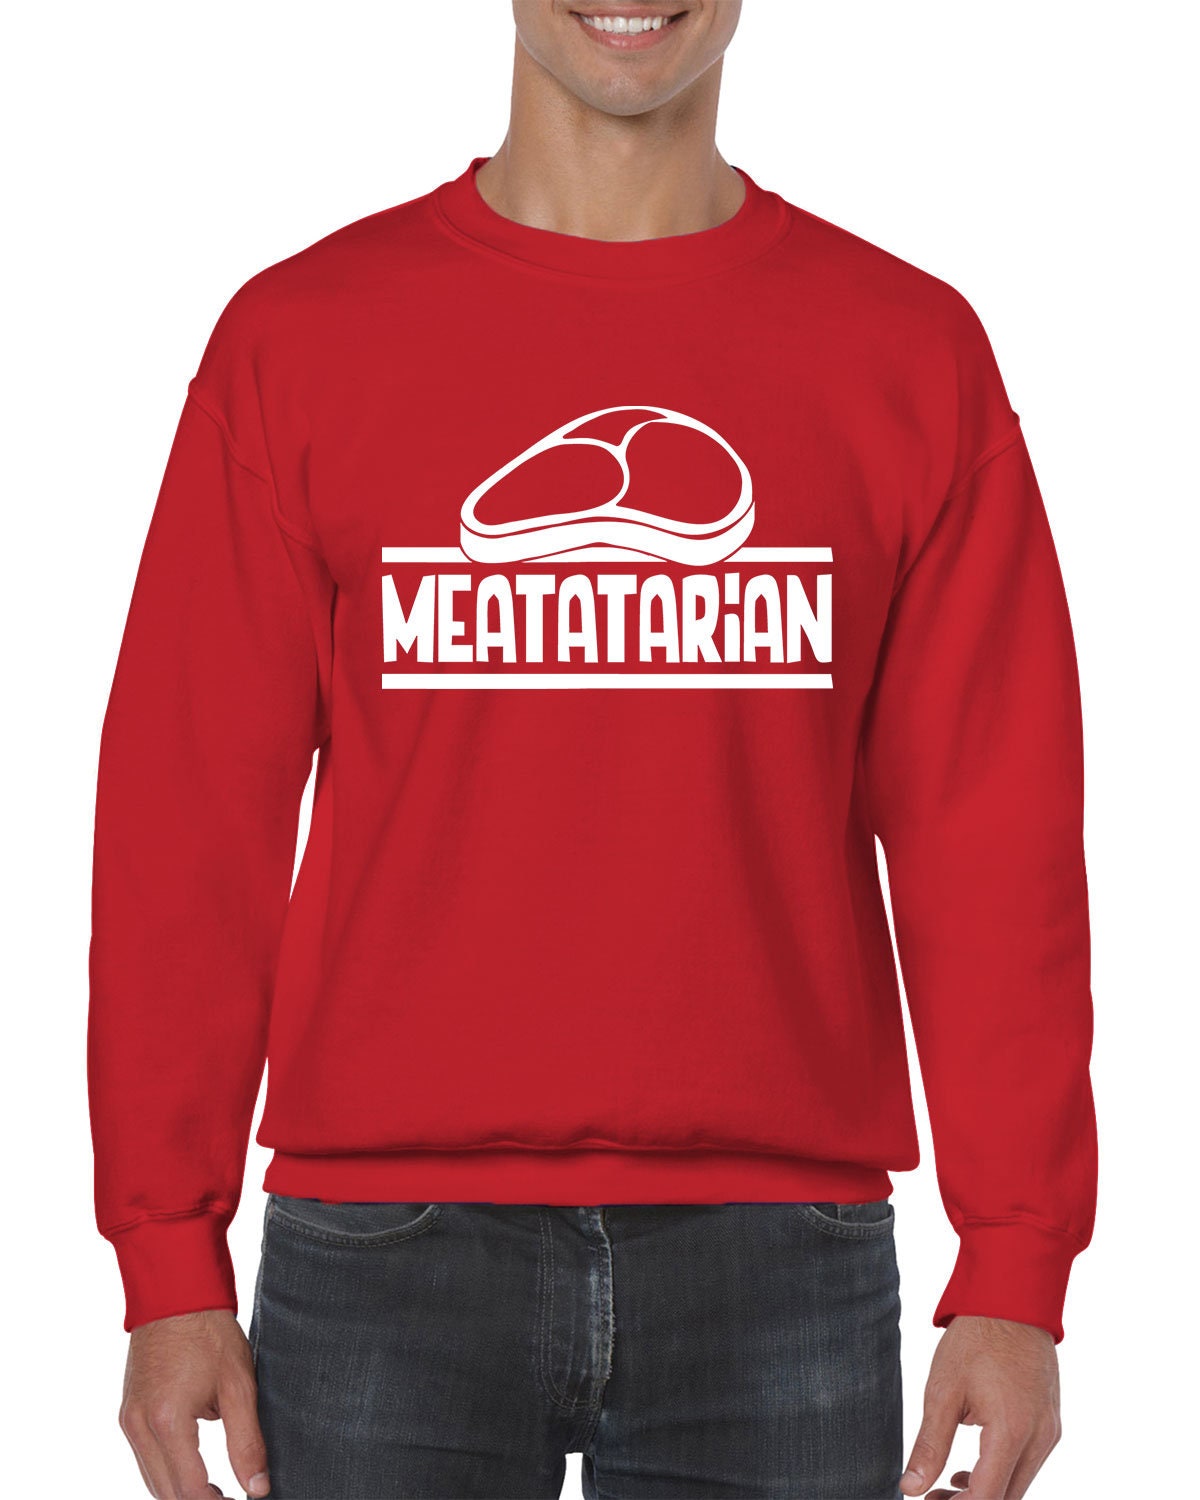 Meatatarian Carnivore Diet No-Vegans Here No Lettuce Only Animal Meat Beef Steak Poultry Seafood Fish Eating Men's Crew Neck Sweater Sf-0412